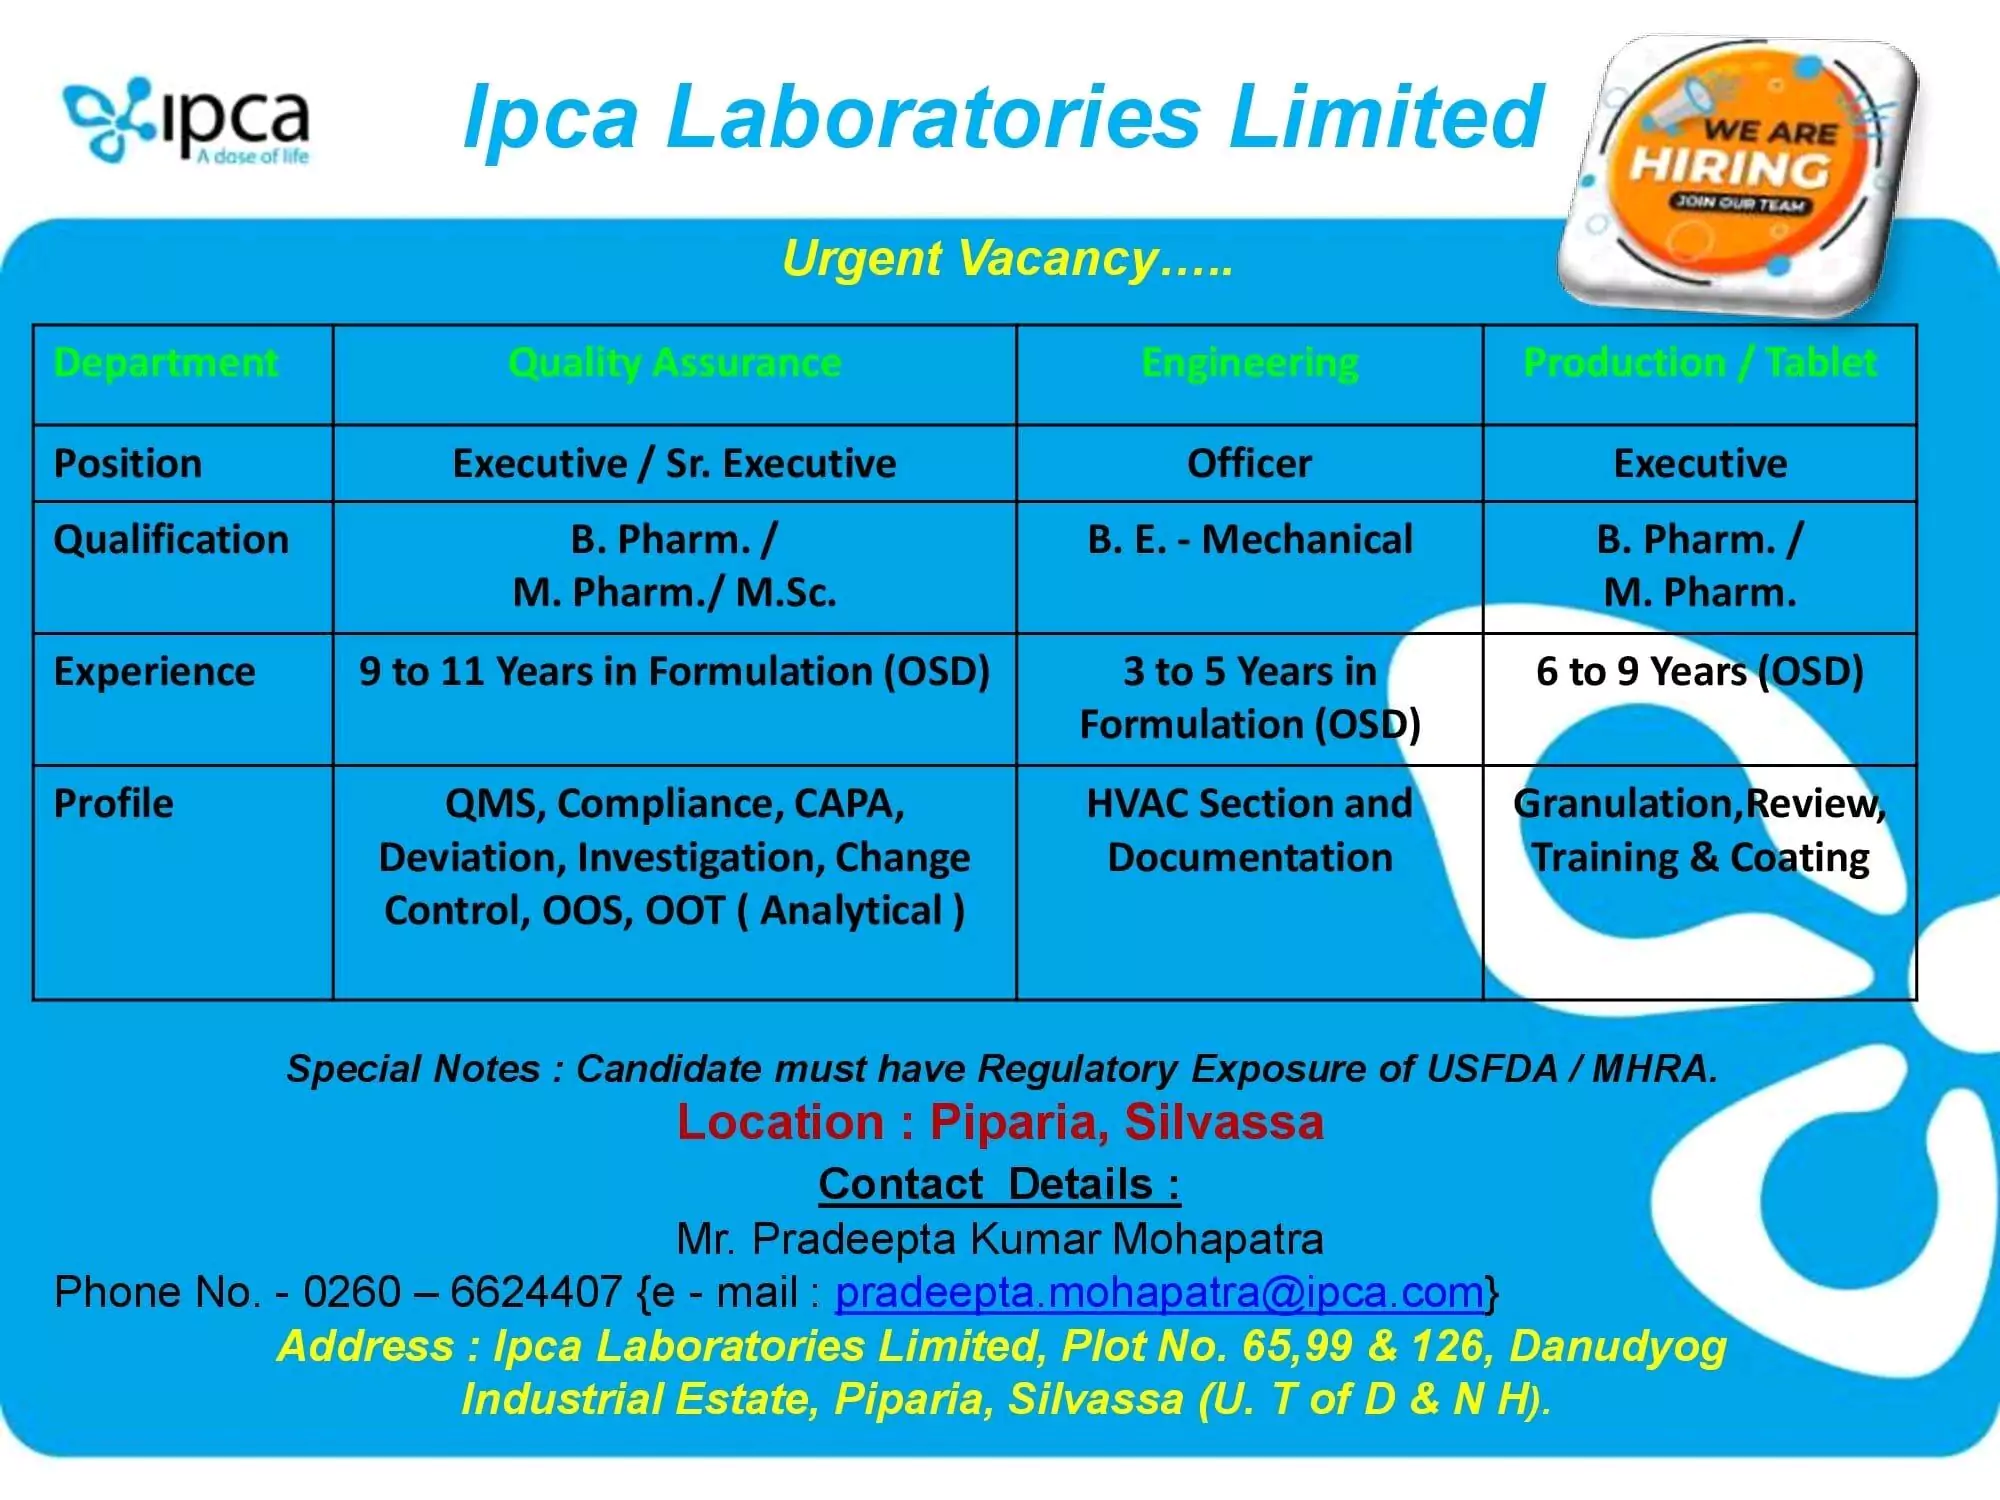 ipca laboratories qc tablet production pharmaceutical engineering jobs 2022